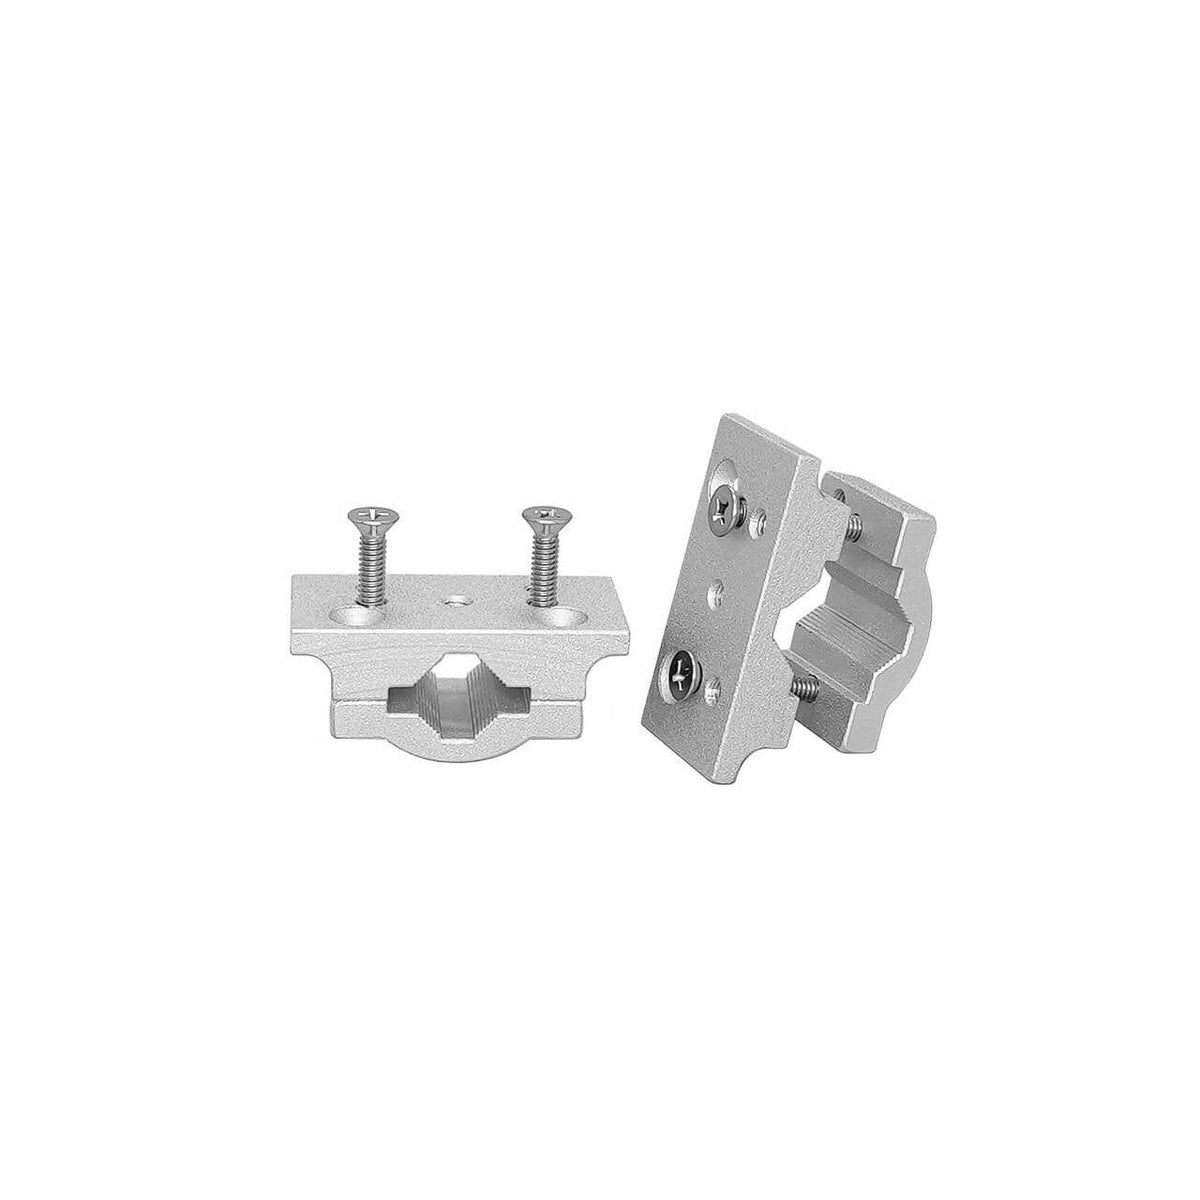 View of boating_accessories Traxstech Rail mounts for mounting tracks fits round rails 3/4" to 1-1/4" dia rails and 1-1/4" square rails - 2 pack Silver available at EZOKO Pike and Musky Shop